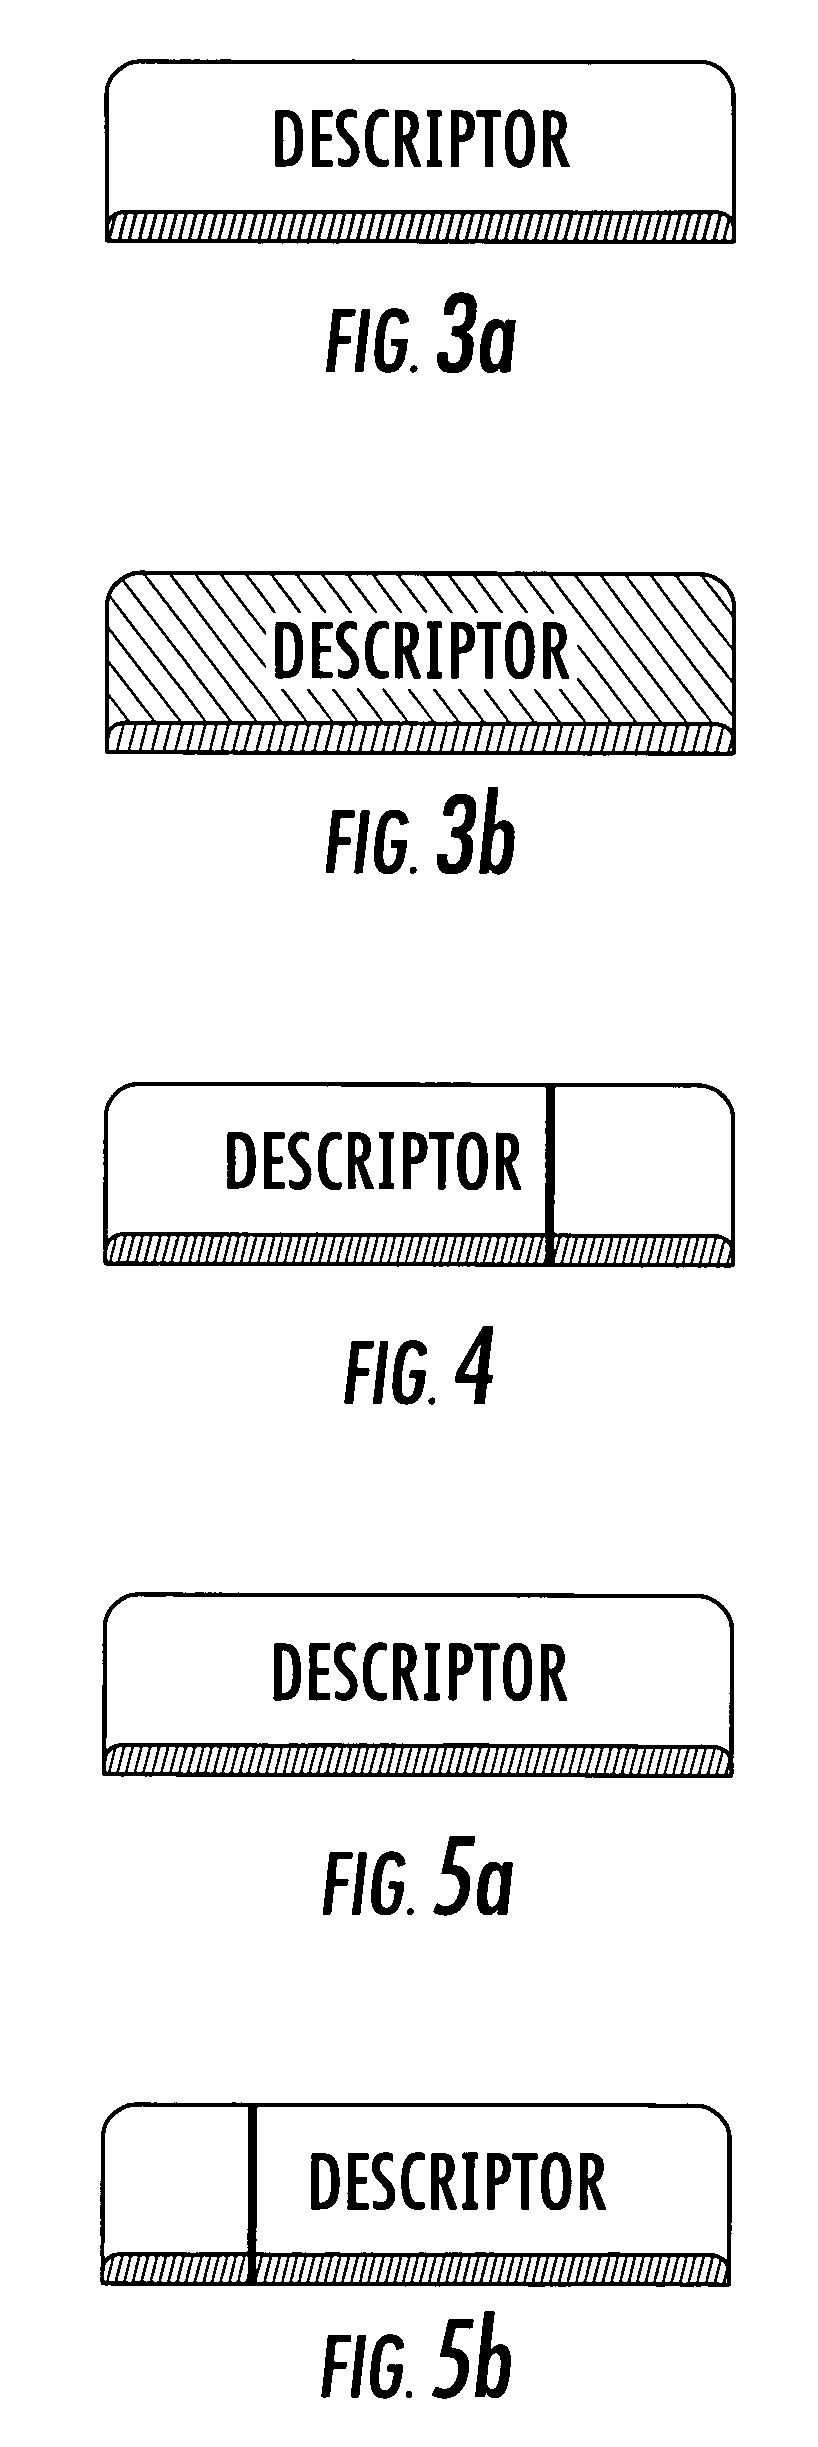 Method of analyzing industrial food products, cosmetics, and/or hygiene products, a measurement interface for implementing the method, and an electronic system for implementing the interface